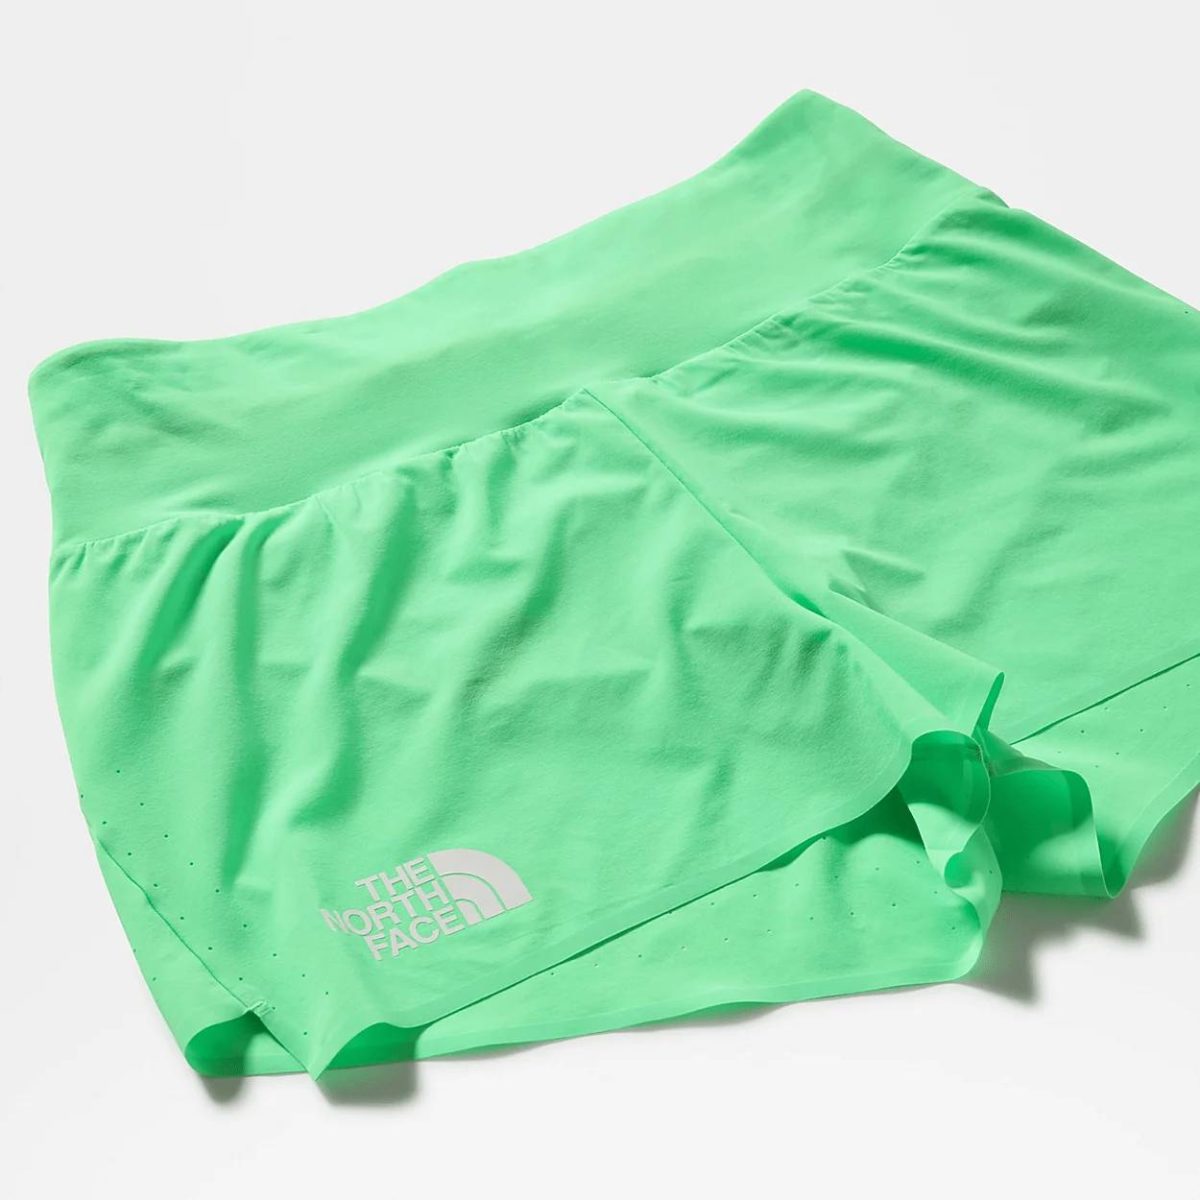 The North Face Womens stridelight Flight short at Fast and Light CH 005